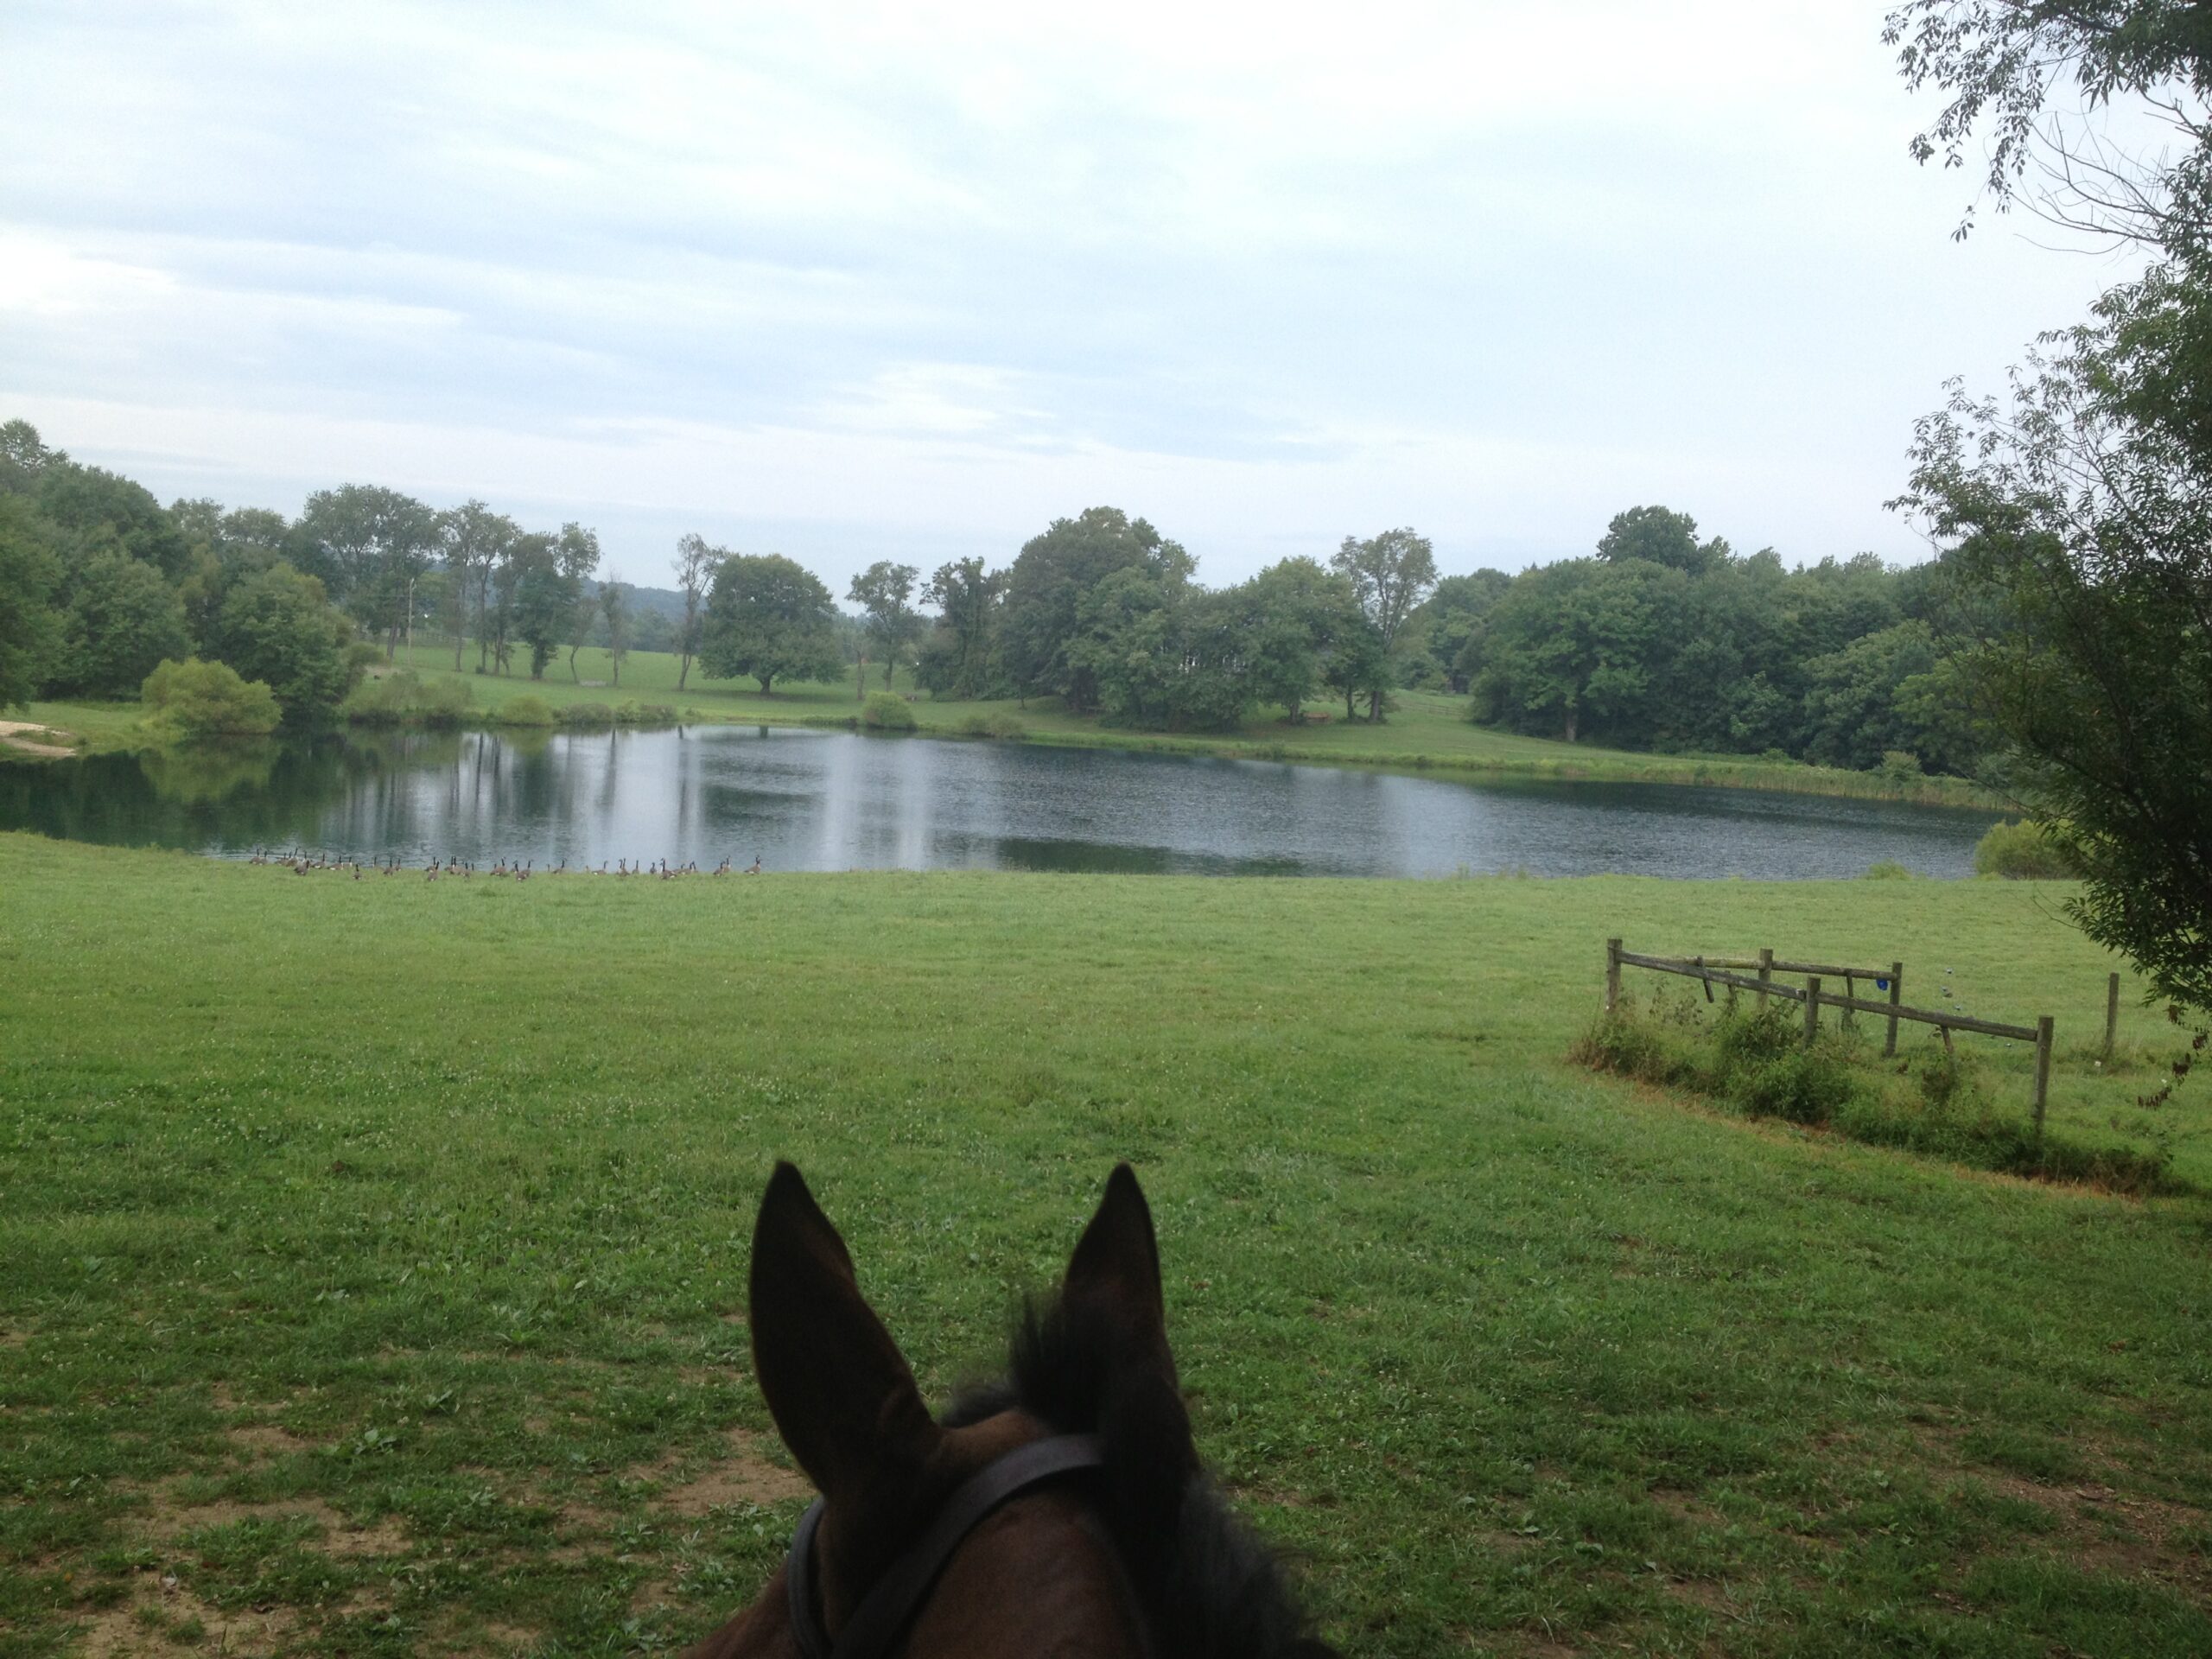 A little ride around the property with Jessie